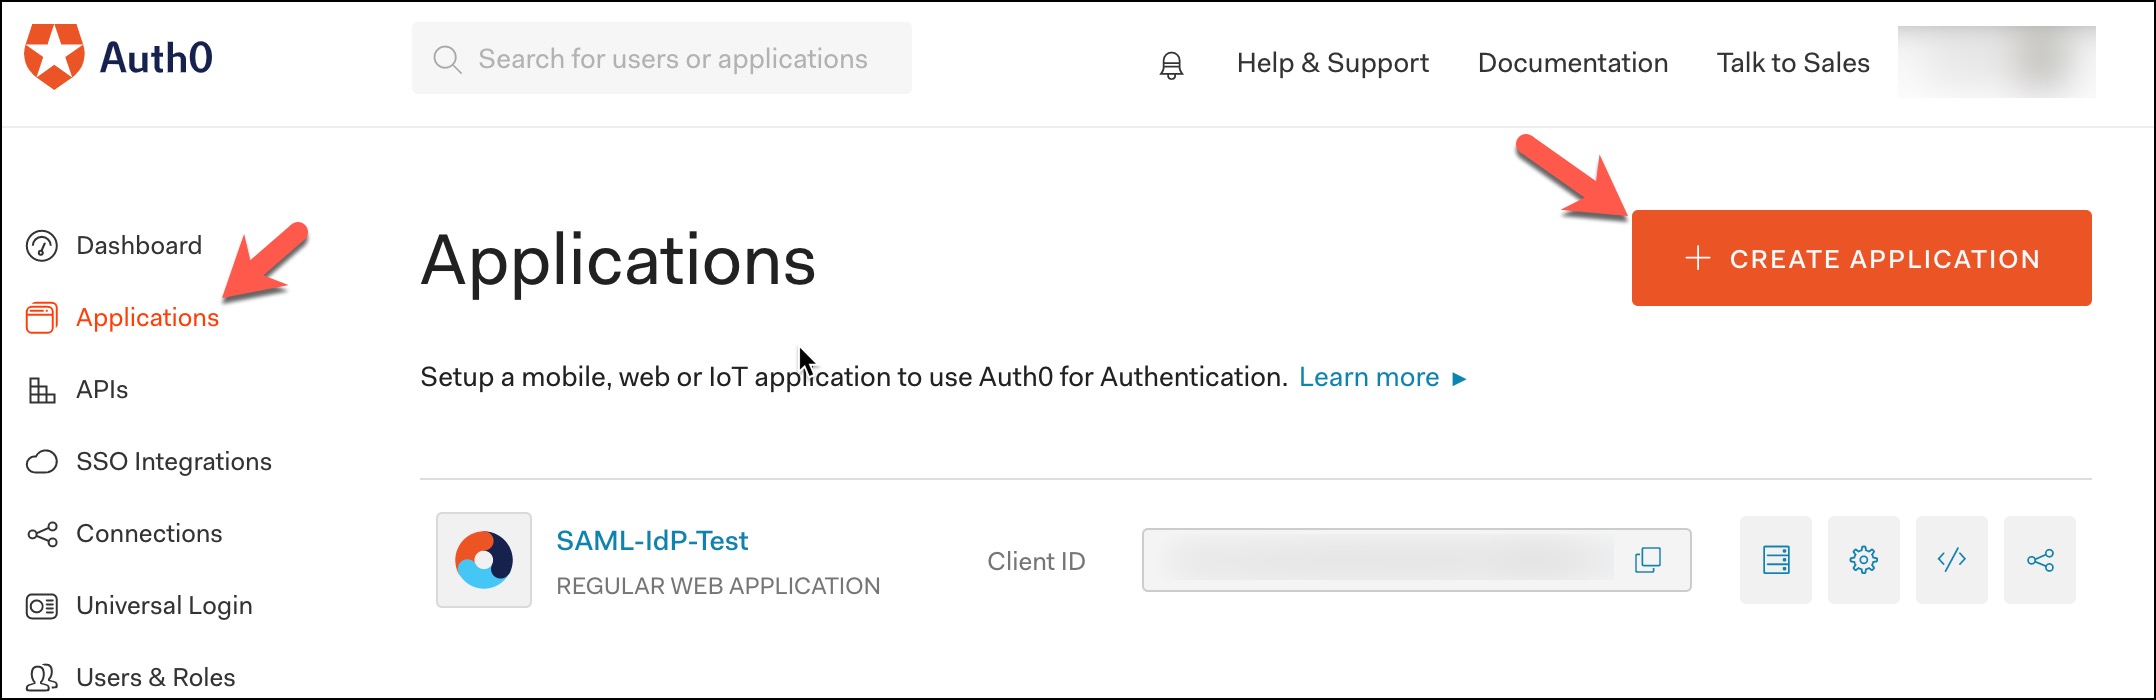 auth0-create-application-1